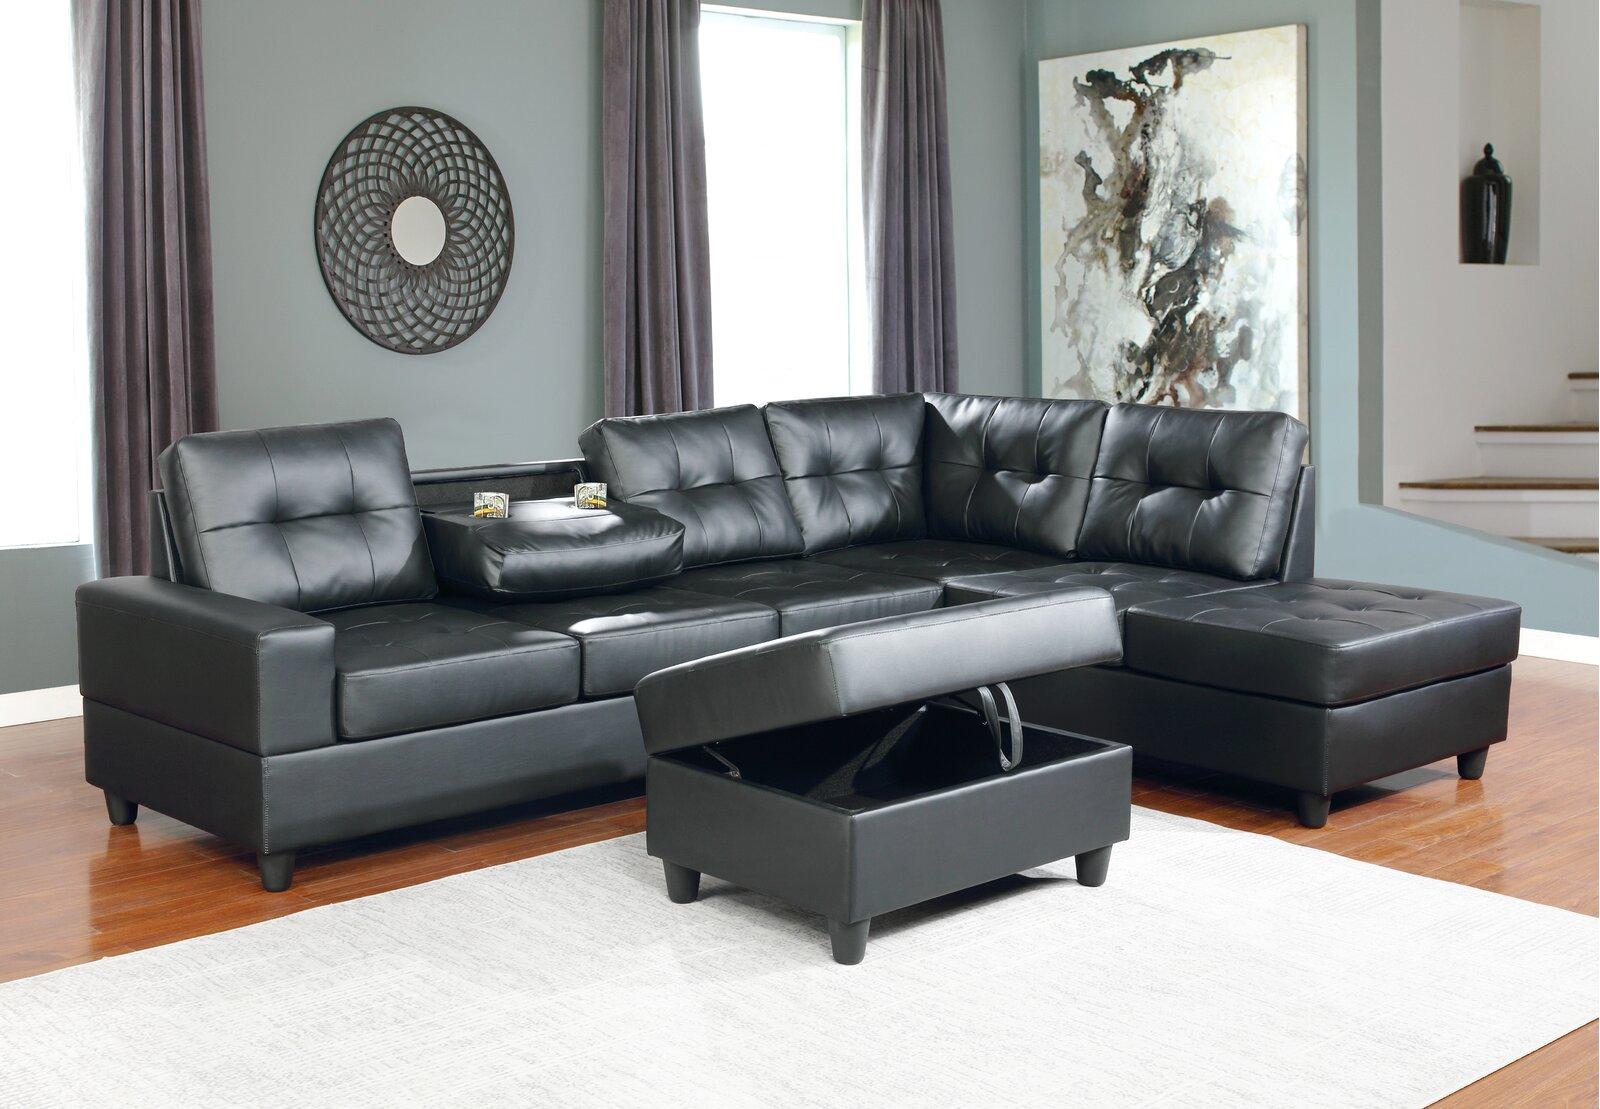 Contemporary, Modern Sectional Sofa BOSTON GHF-808857868275 in Black Eco-Leather